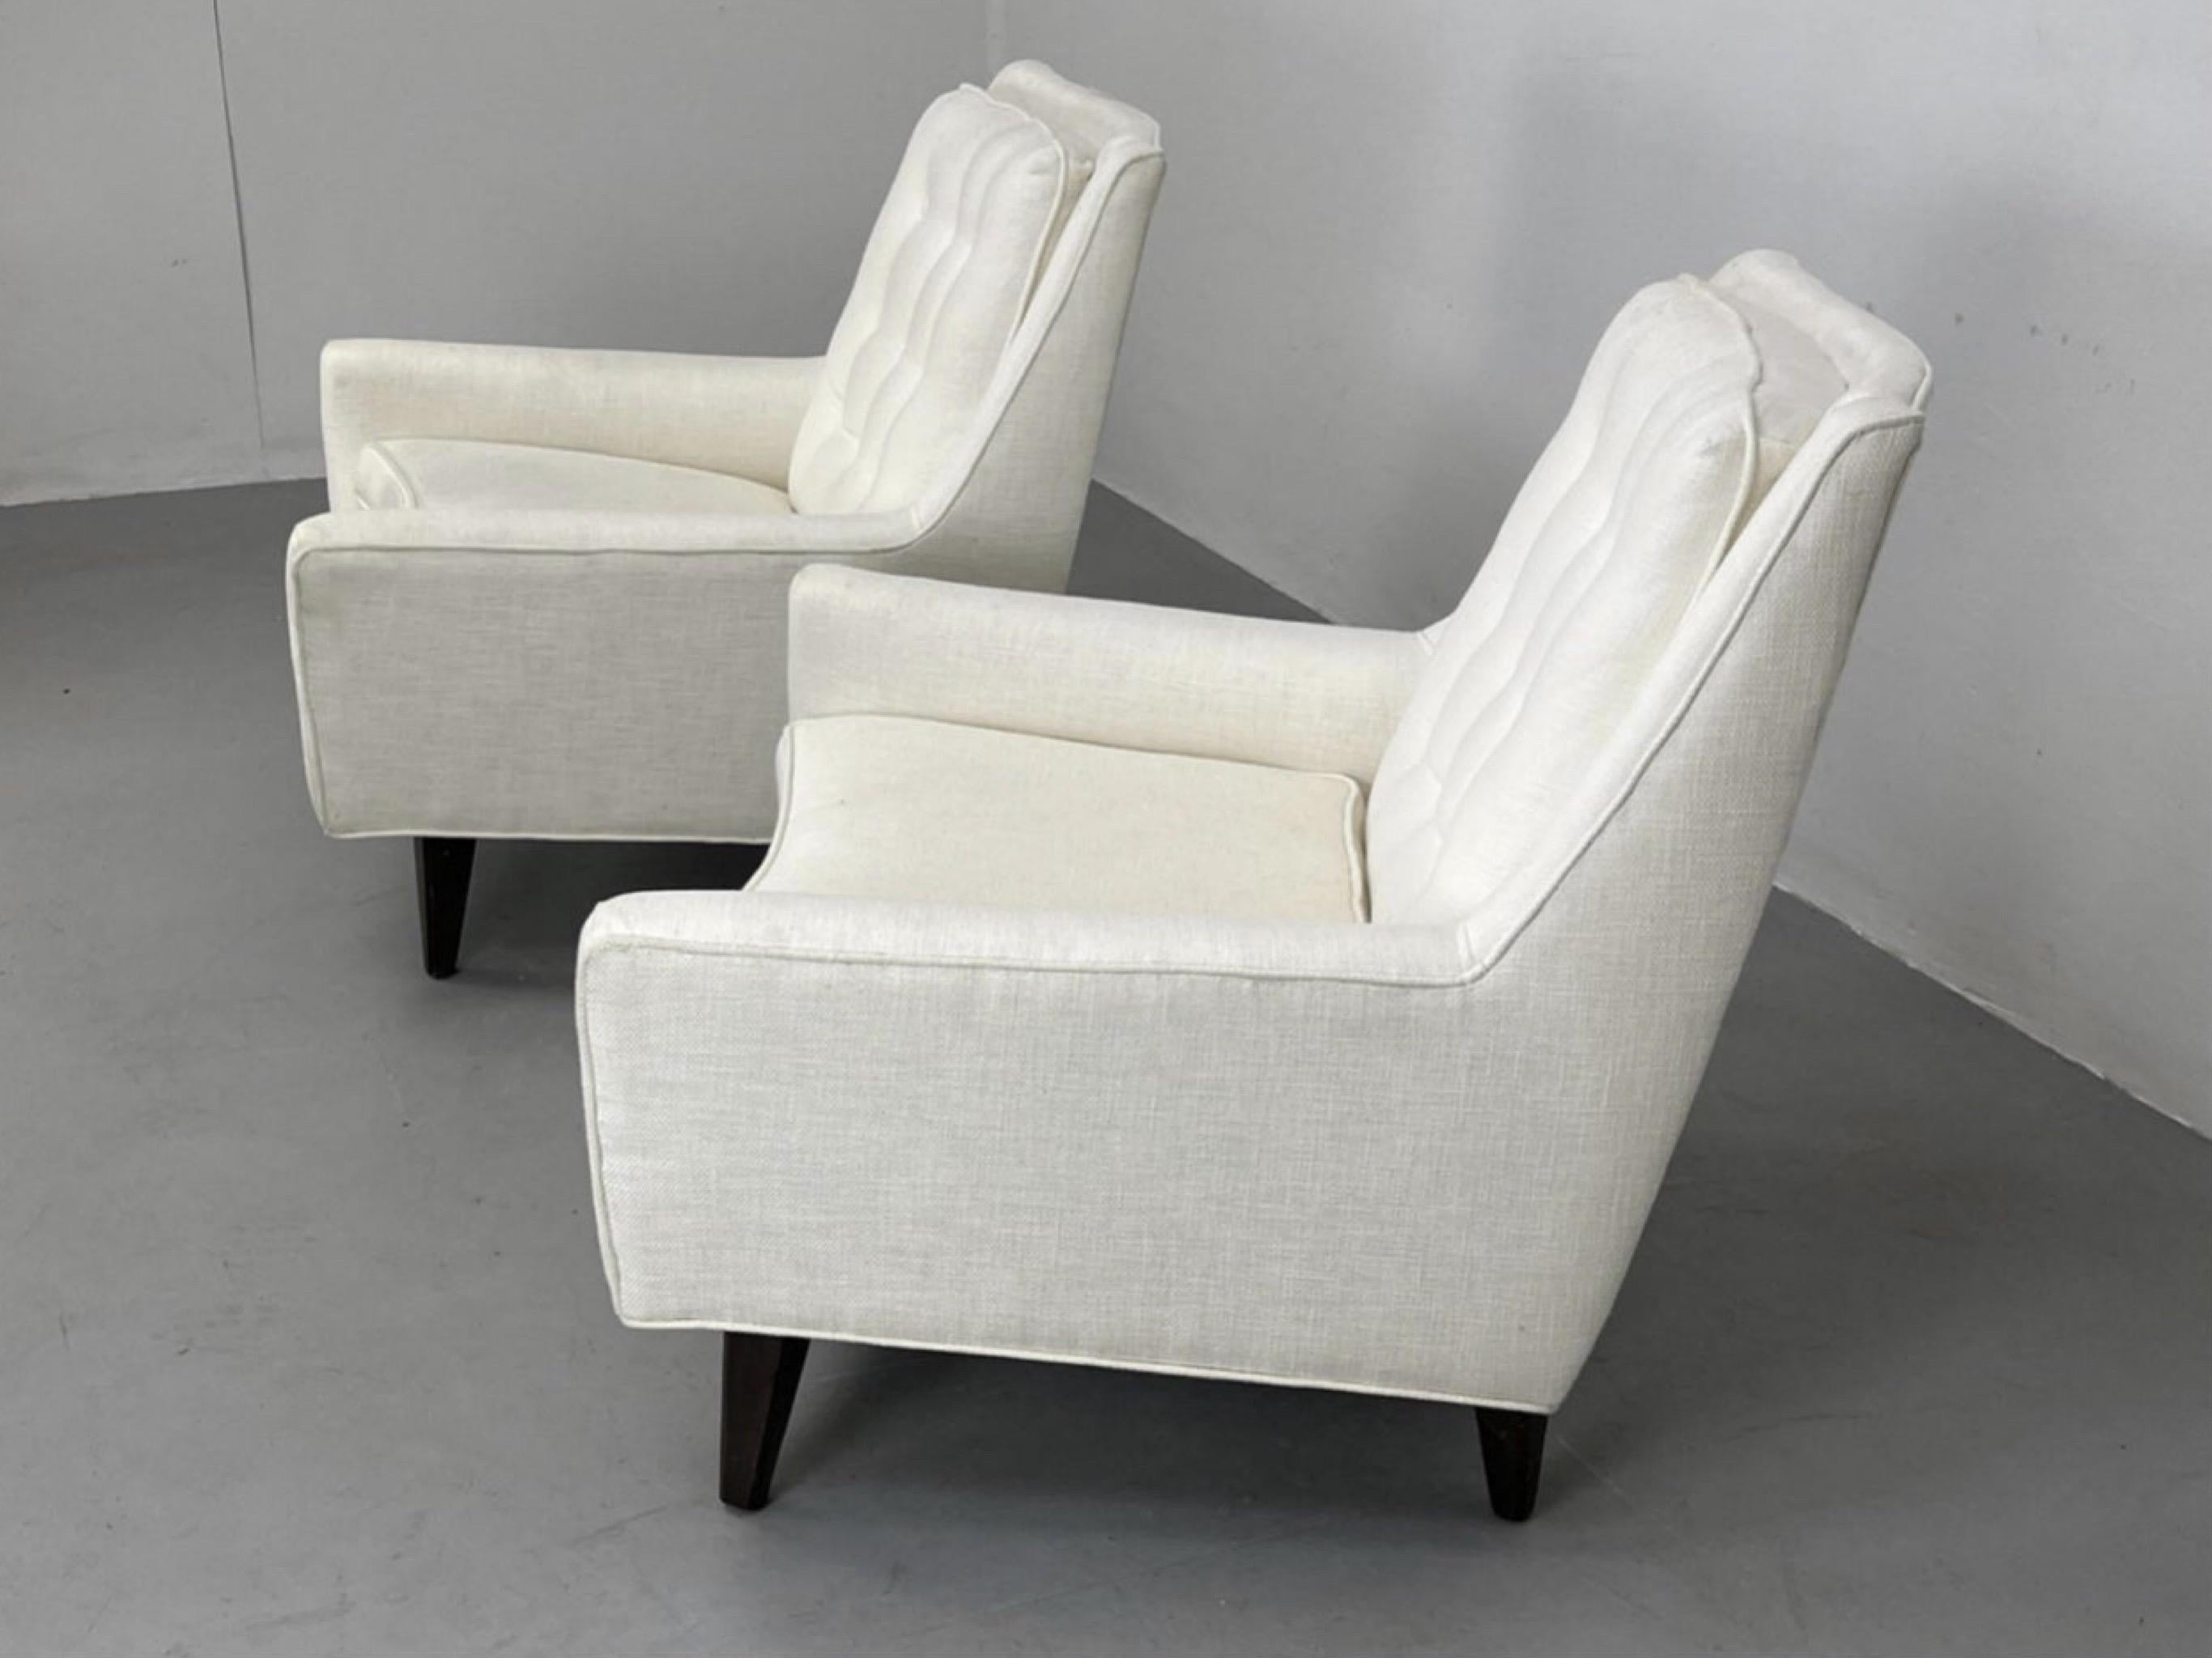 American Edward Wormley Attributed White Upholstered Lounge Chairs - a Pair